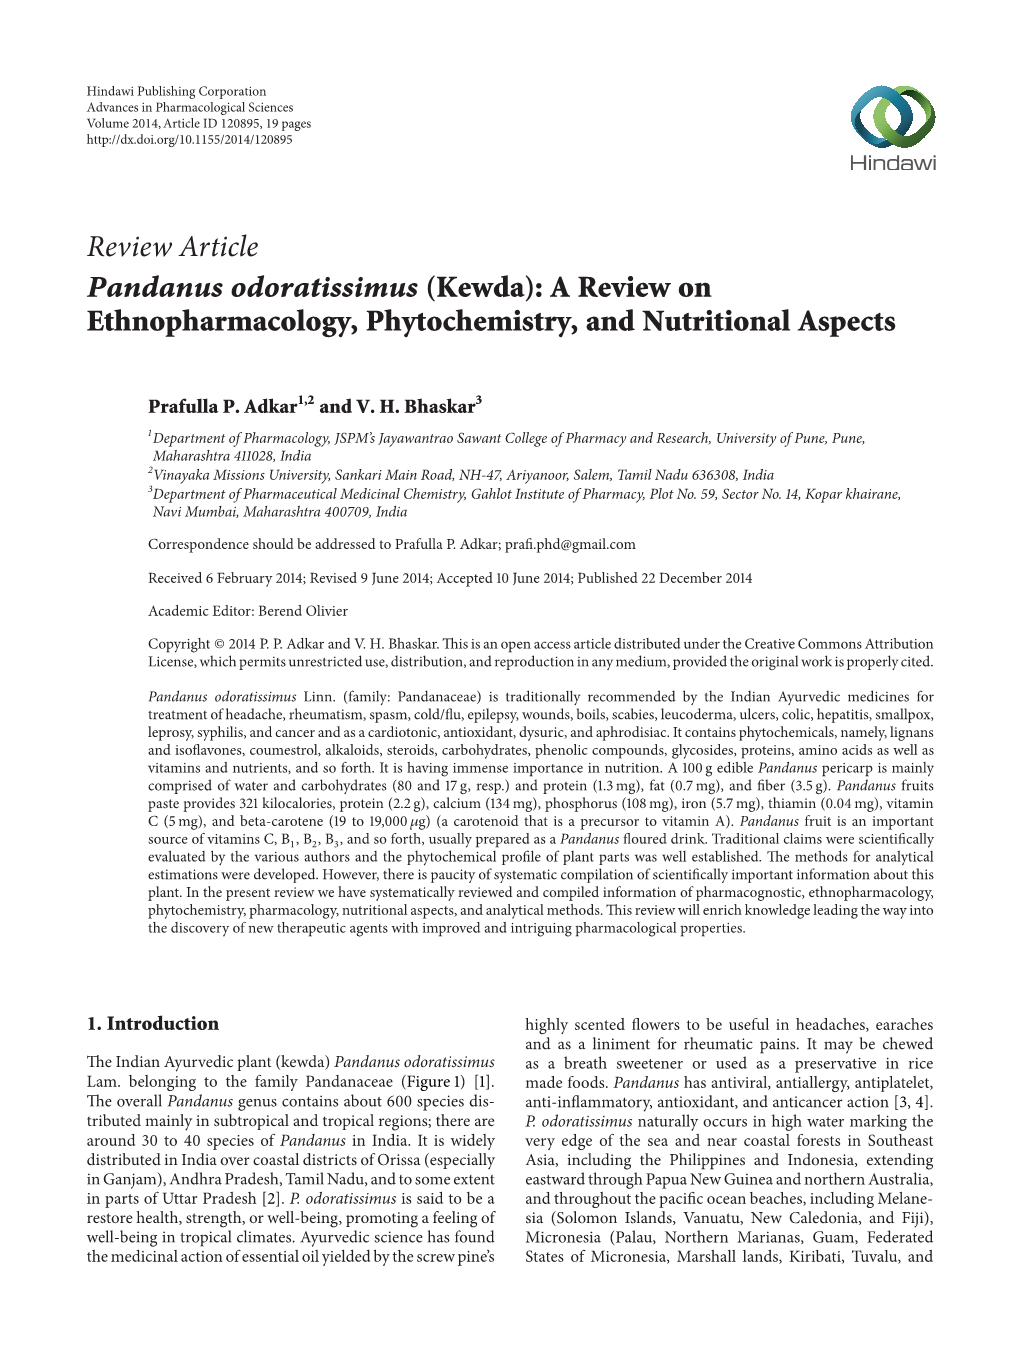 Review Article Pandanus Odoratissimus (Kewda): a Review on Ethnopharmacology, Phytochemistry, and Nutritional Aspects